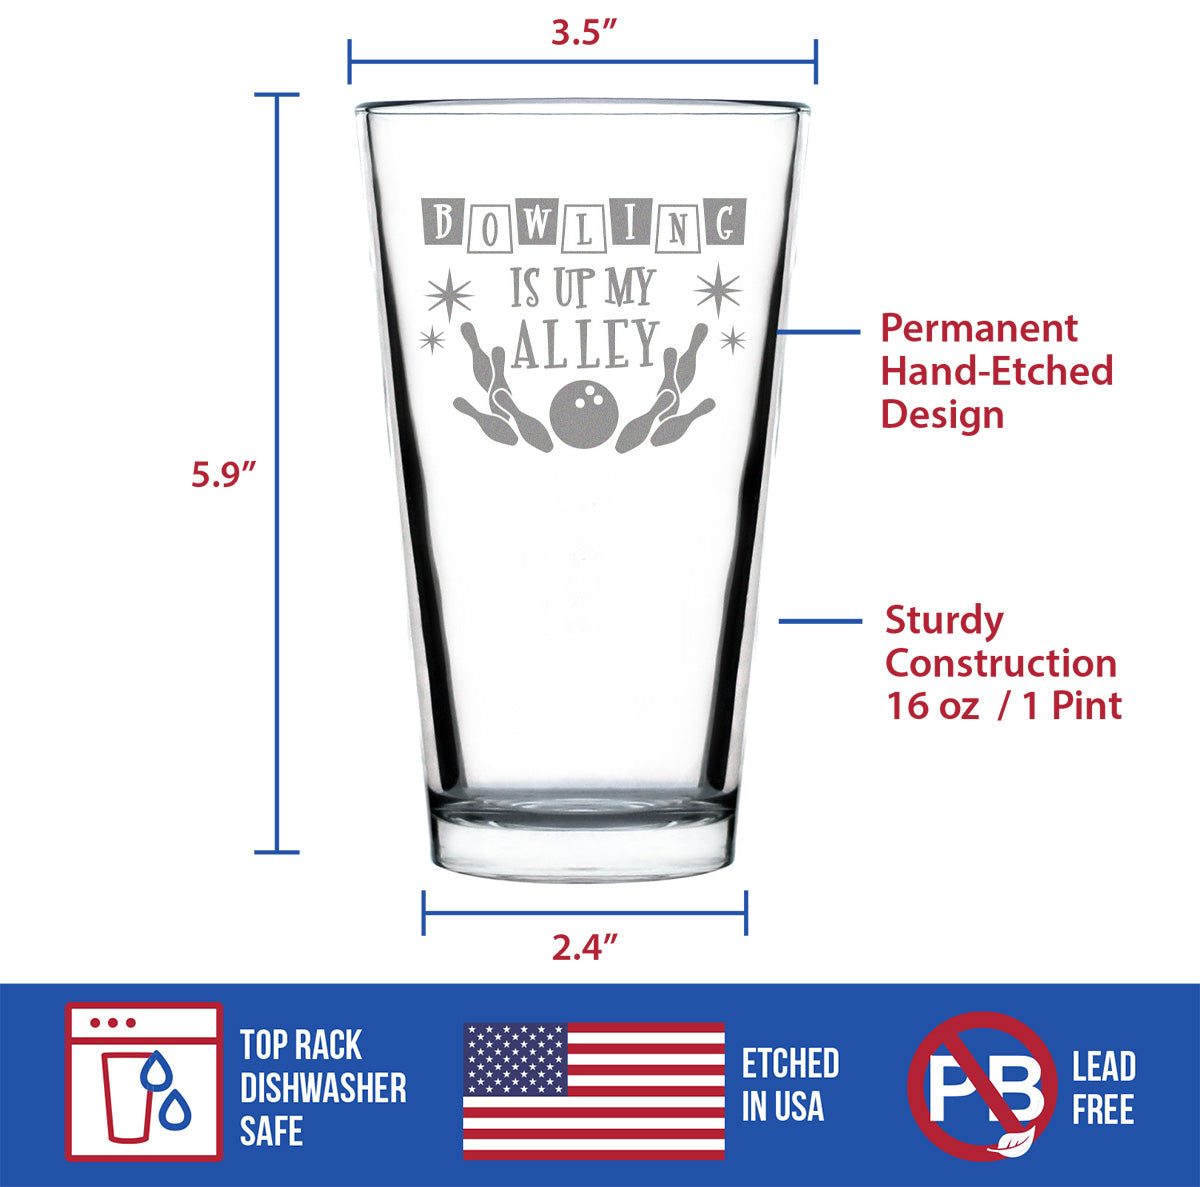 Bowling Is Up My Alley - Pint Glass for Beer - Funny Bowling Themed Gifts and Decor for Bowlers - 16 oz Glass